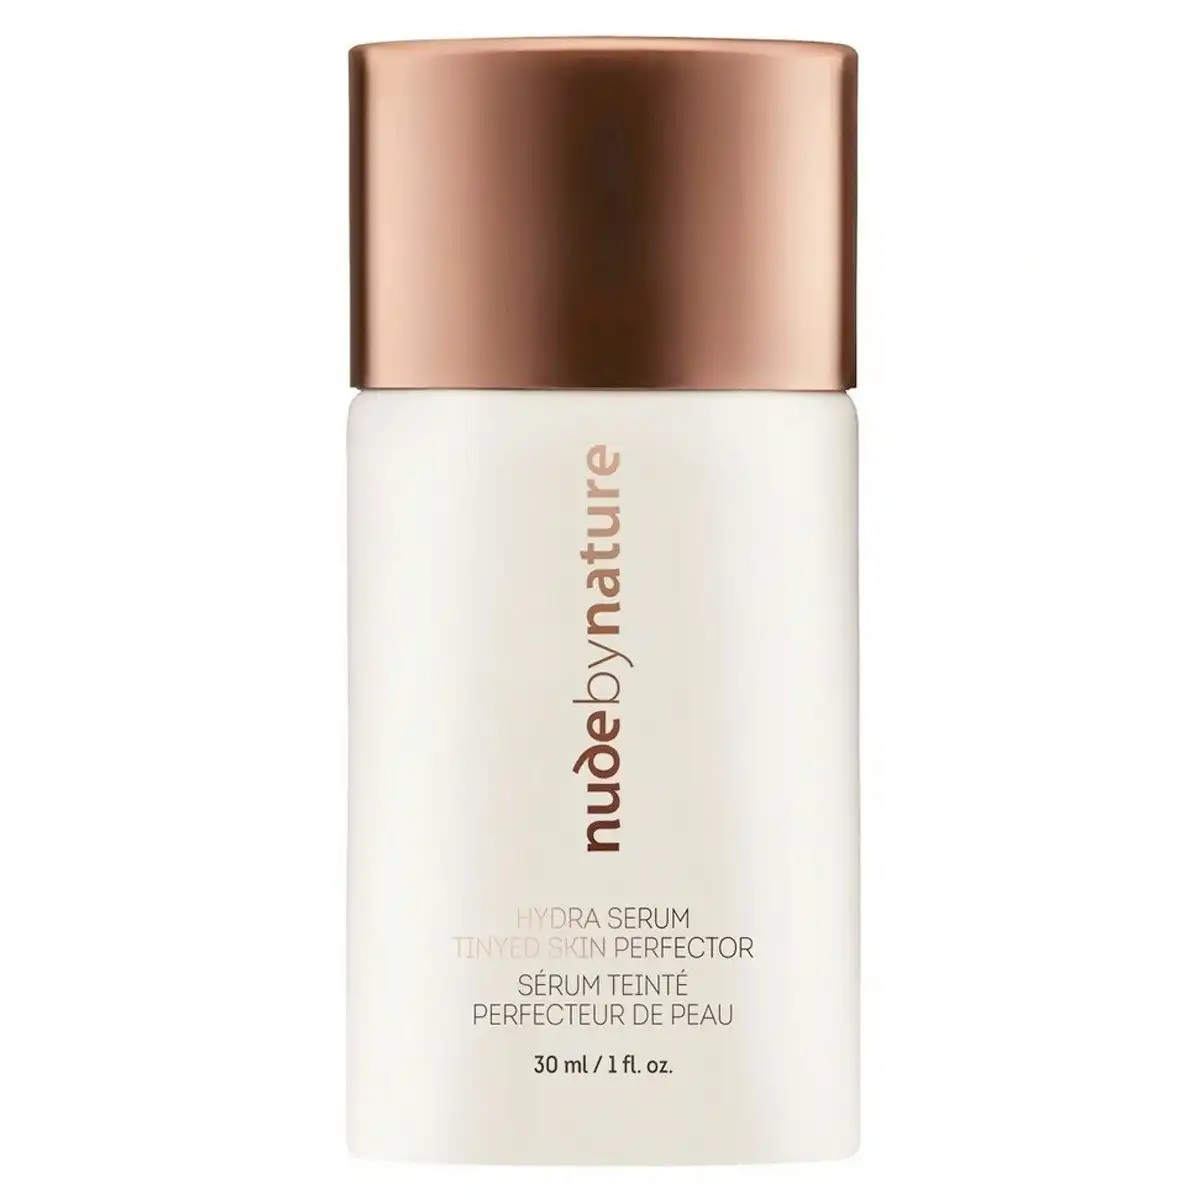 Nude by Nature Hydra Serum Tinted Skin Perfector 30ml